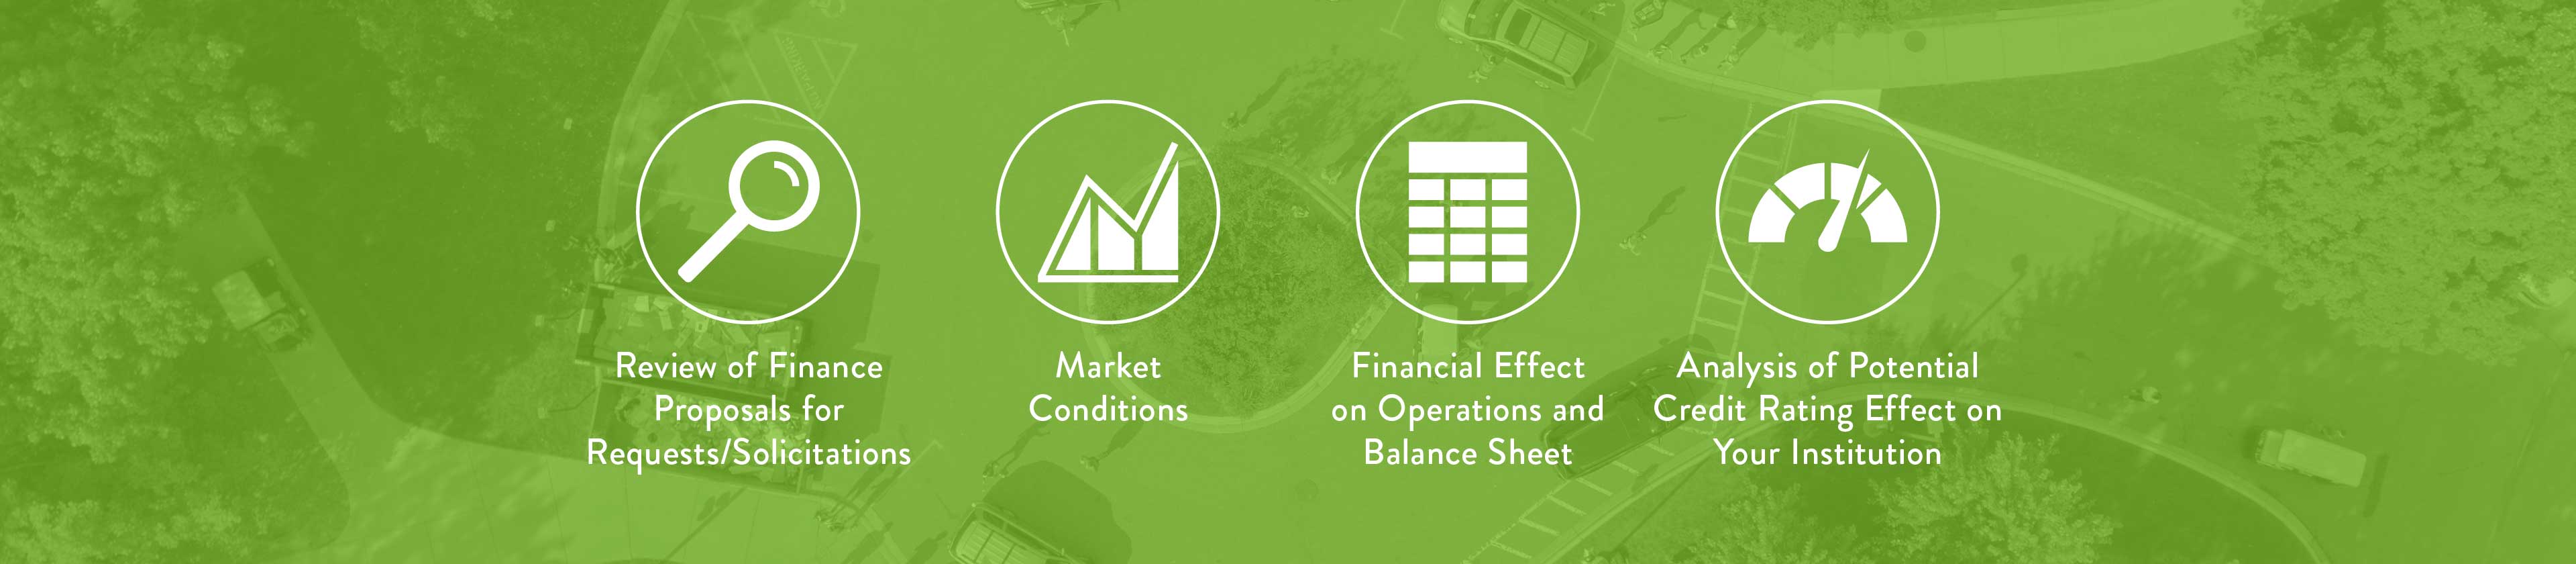 finance icons on the project planning page of the MHEFA website